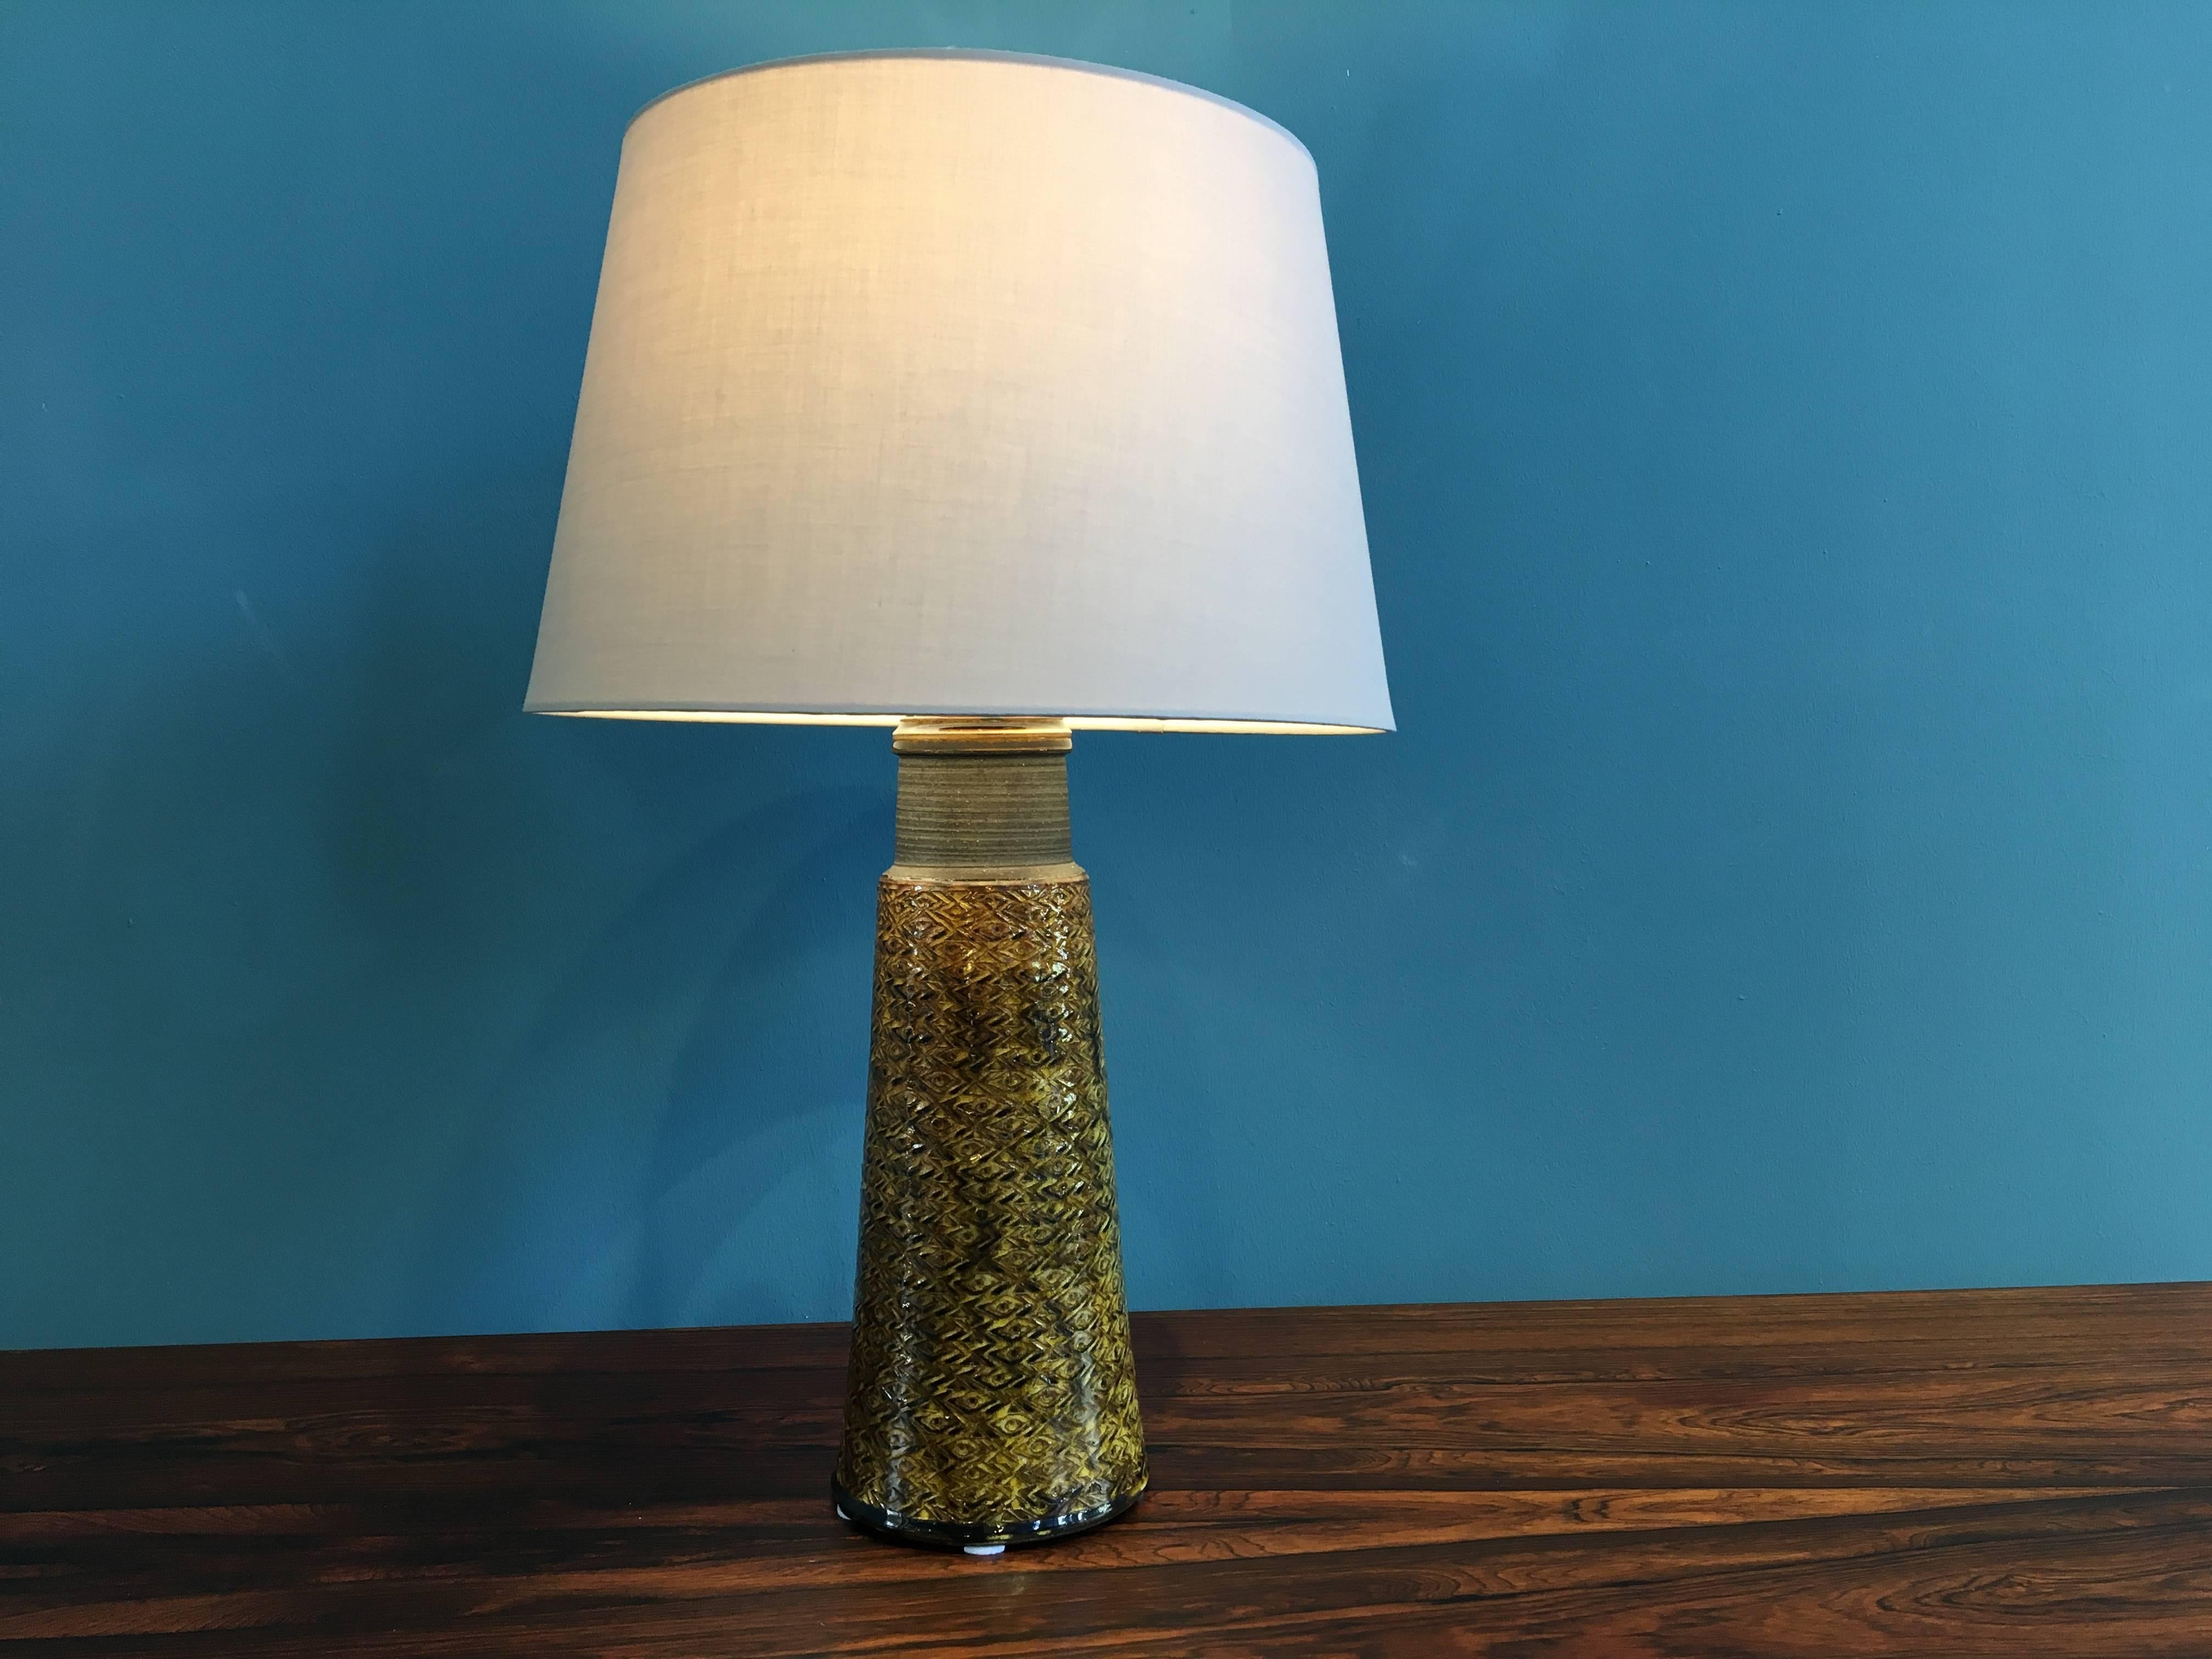 Glazed Large Stoneware Table Lamp with Mustard Colored Glazing by Nils Kähler, Denmark